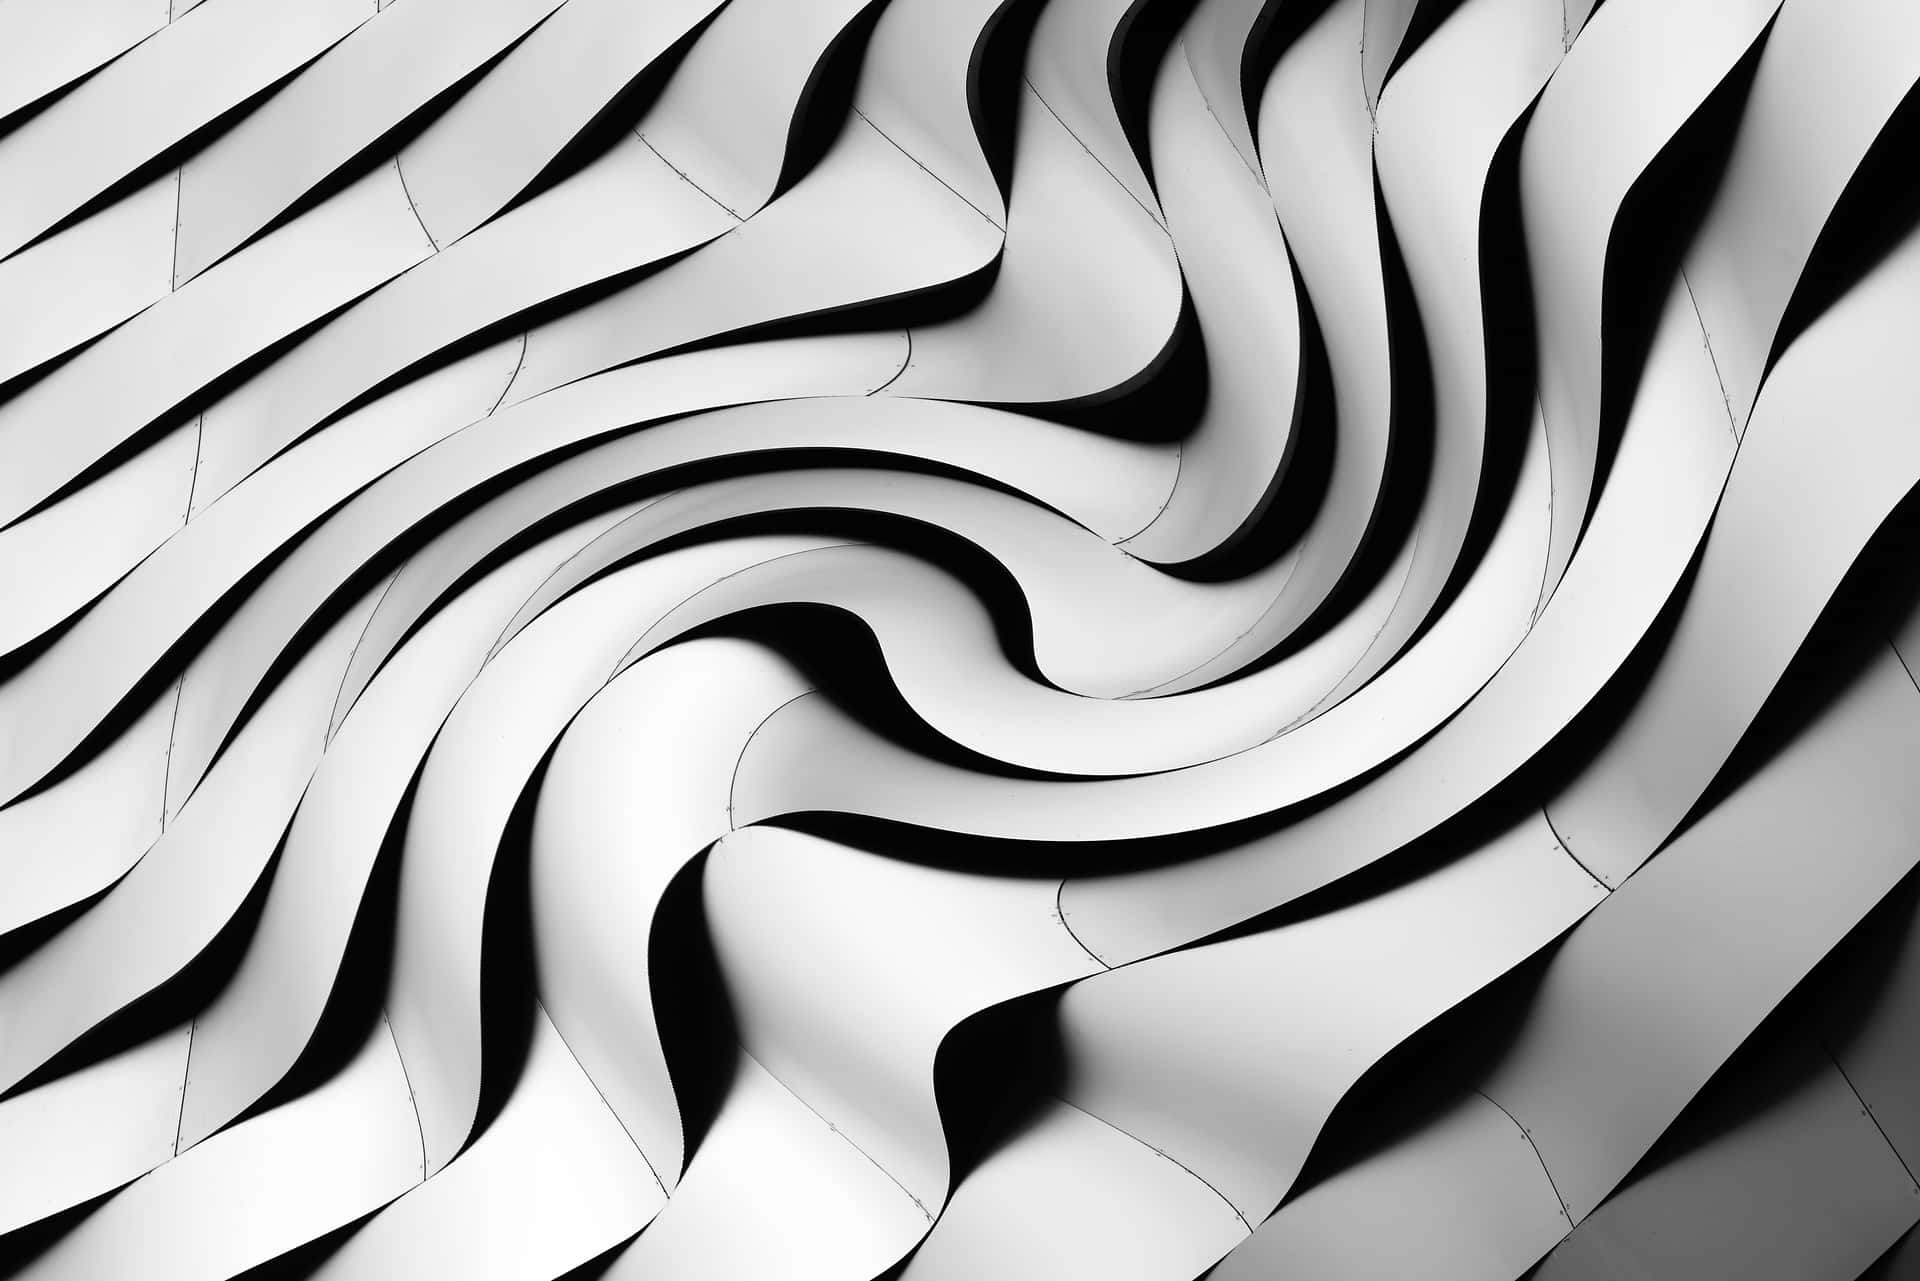 A Black And White Photo Of A Wavy Wall